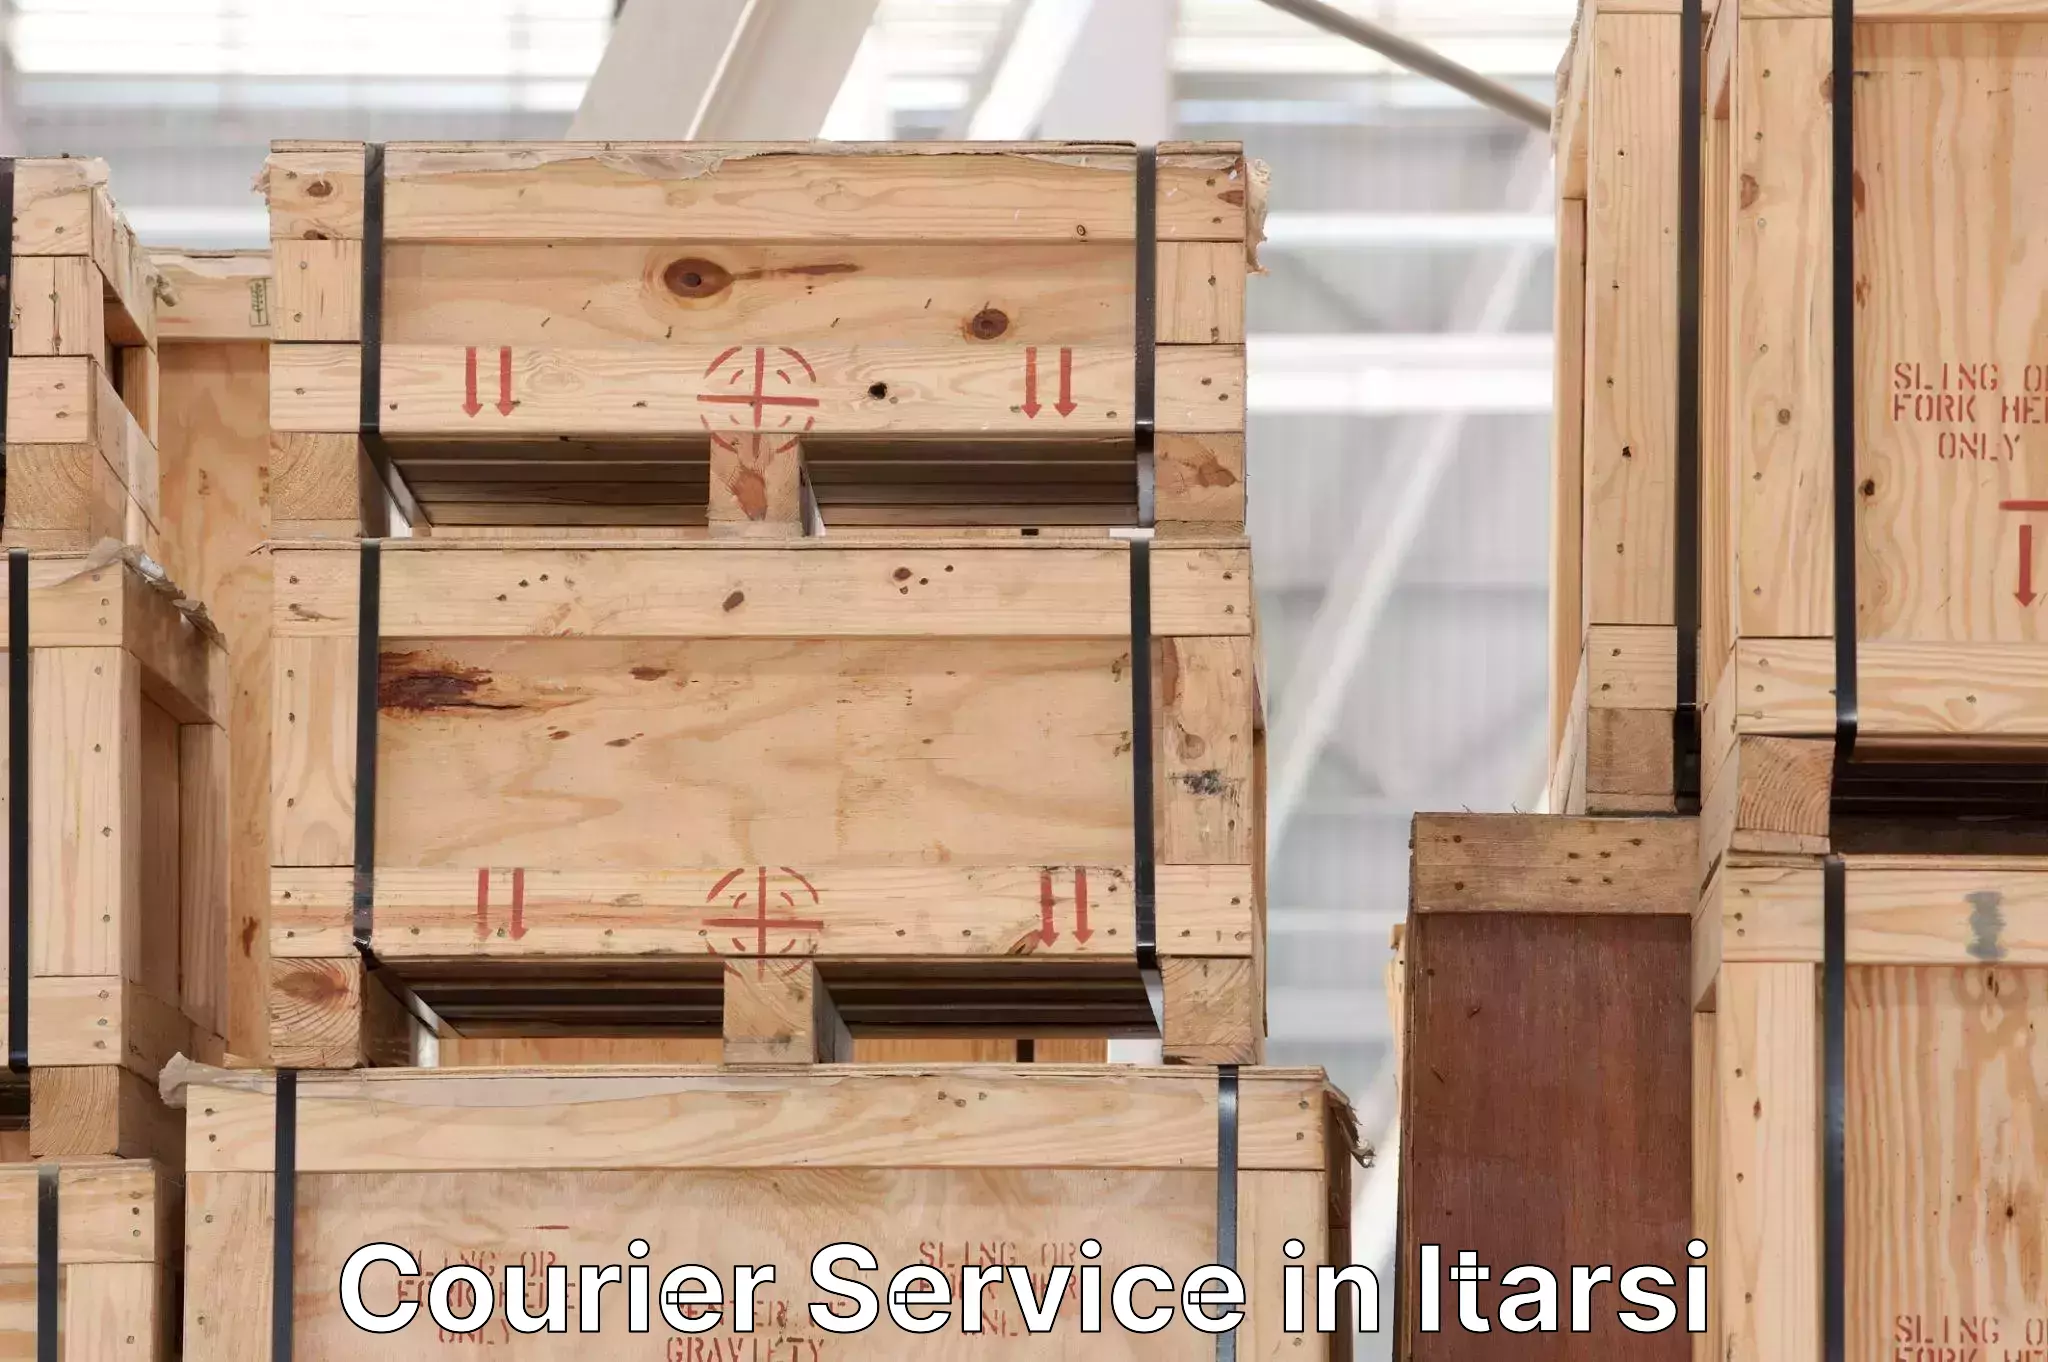 Customer-oriented courier services in Itarsi